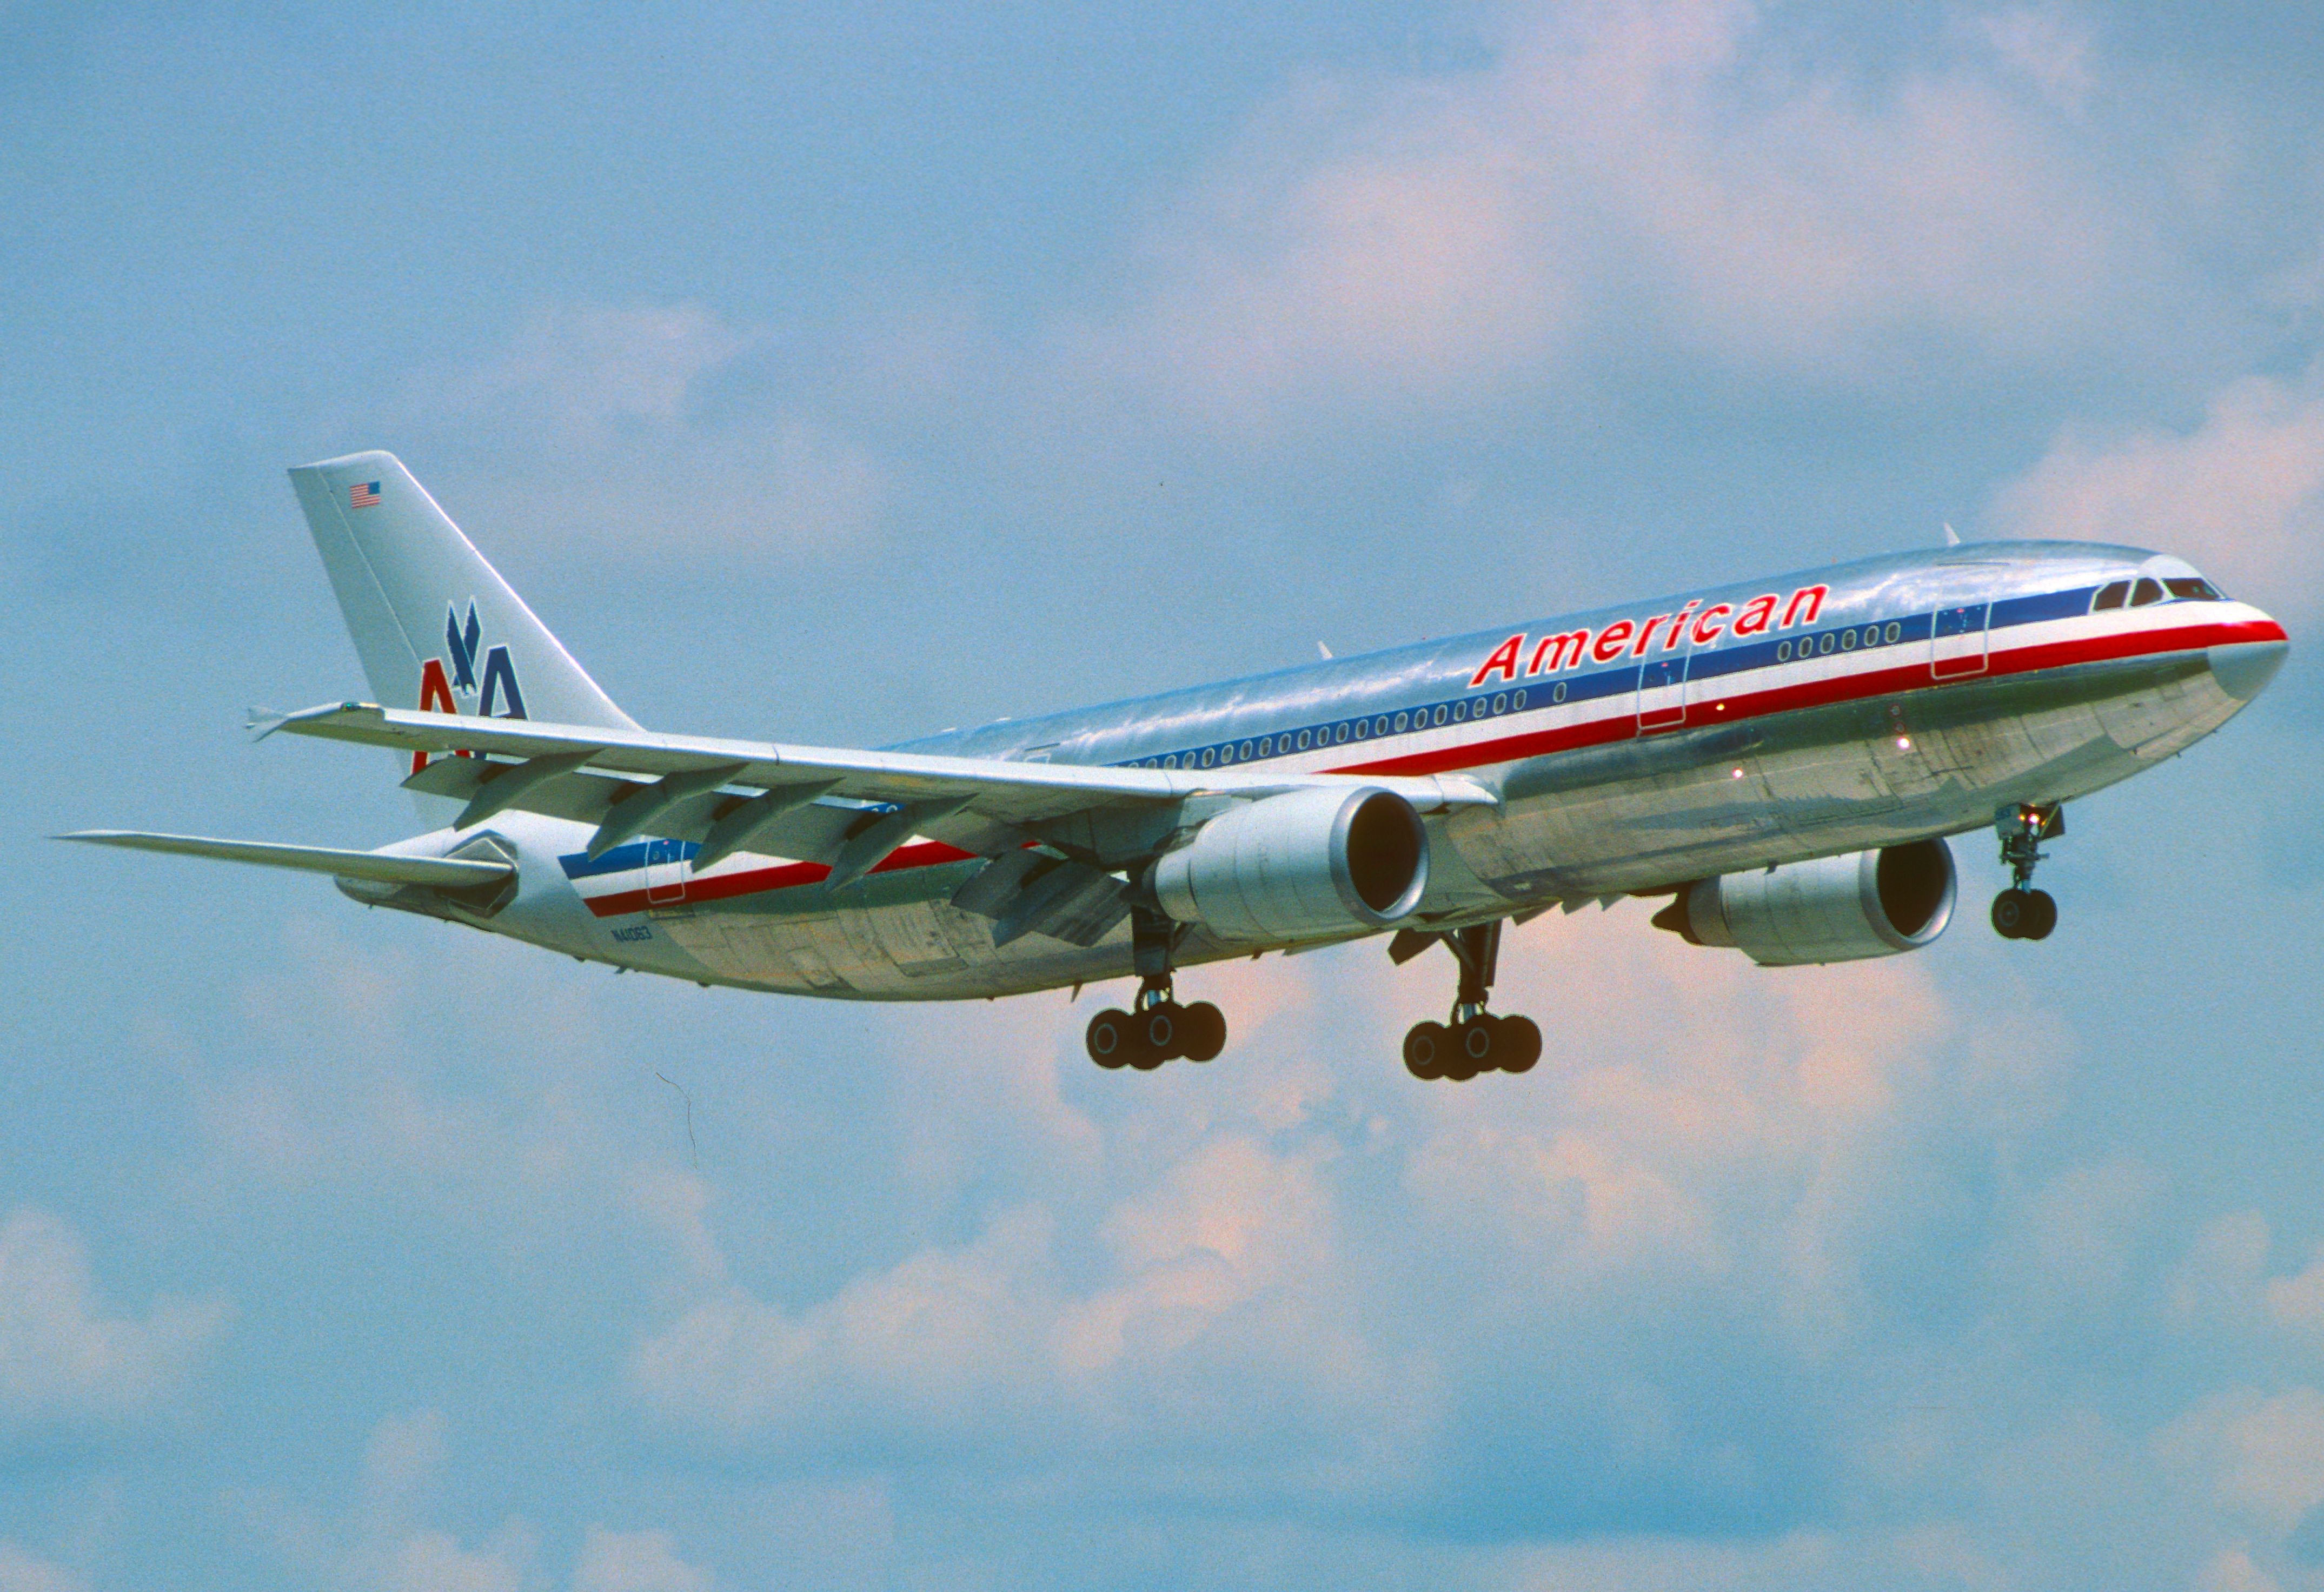 An American Airlines Airbus A300-600 Flying in the sky.